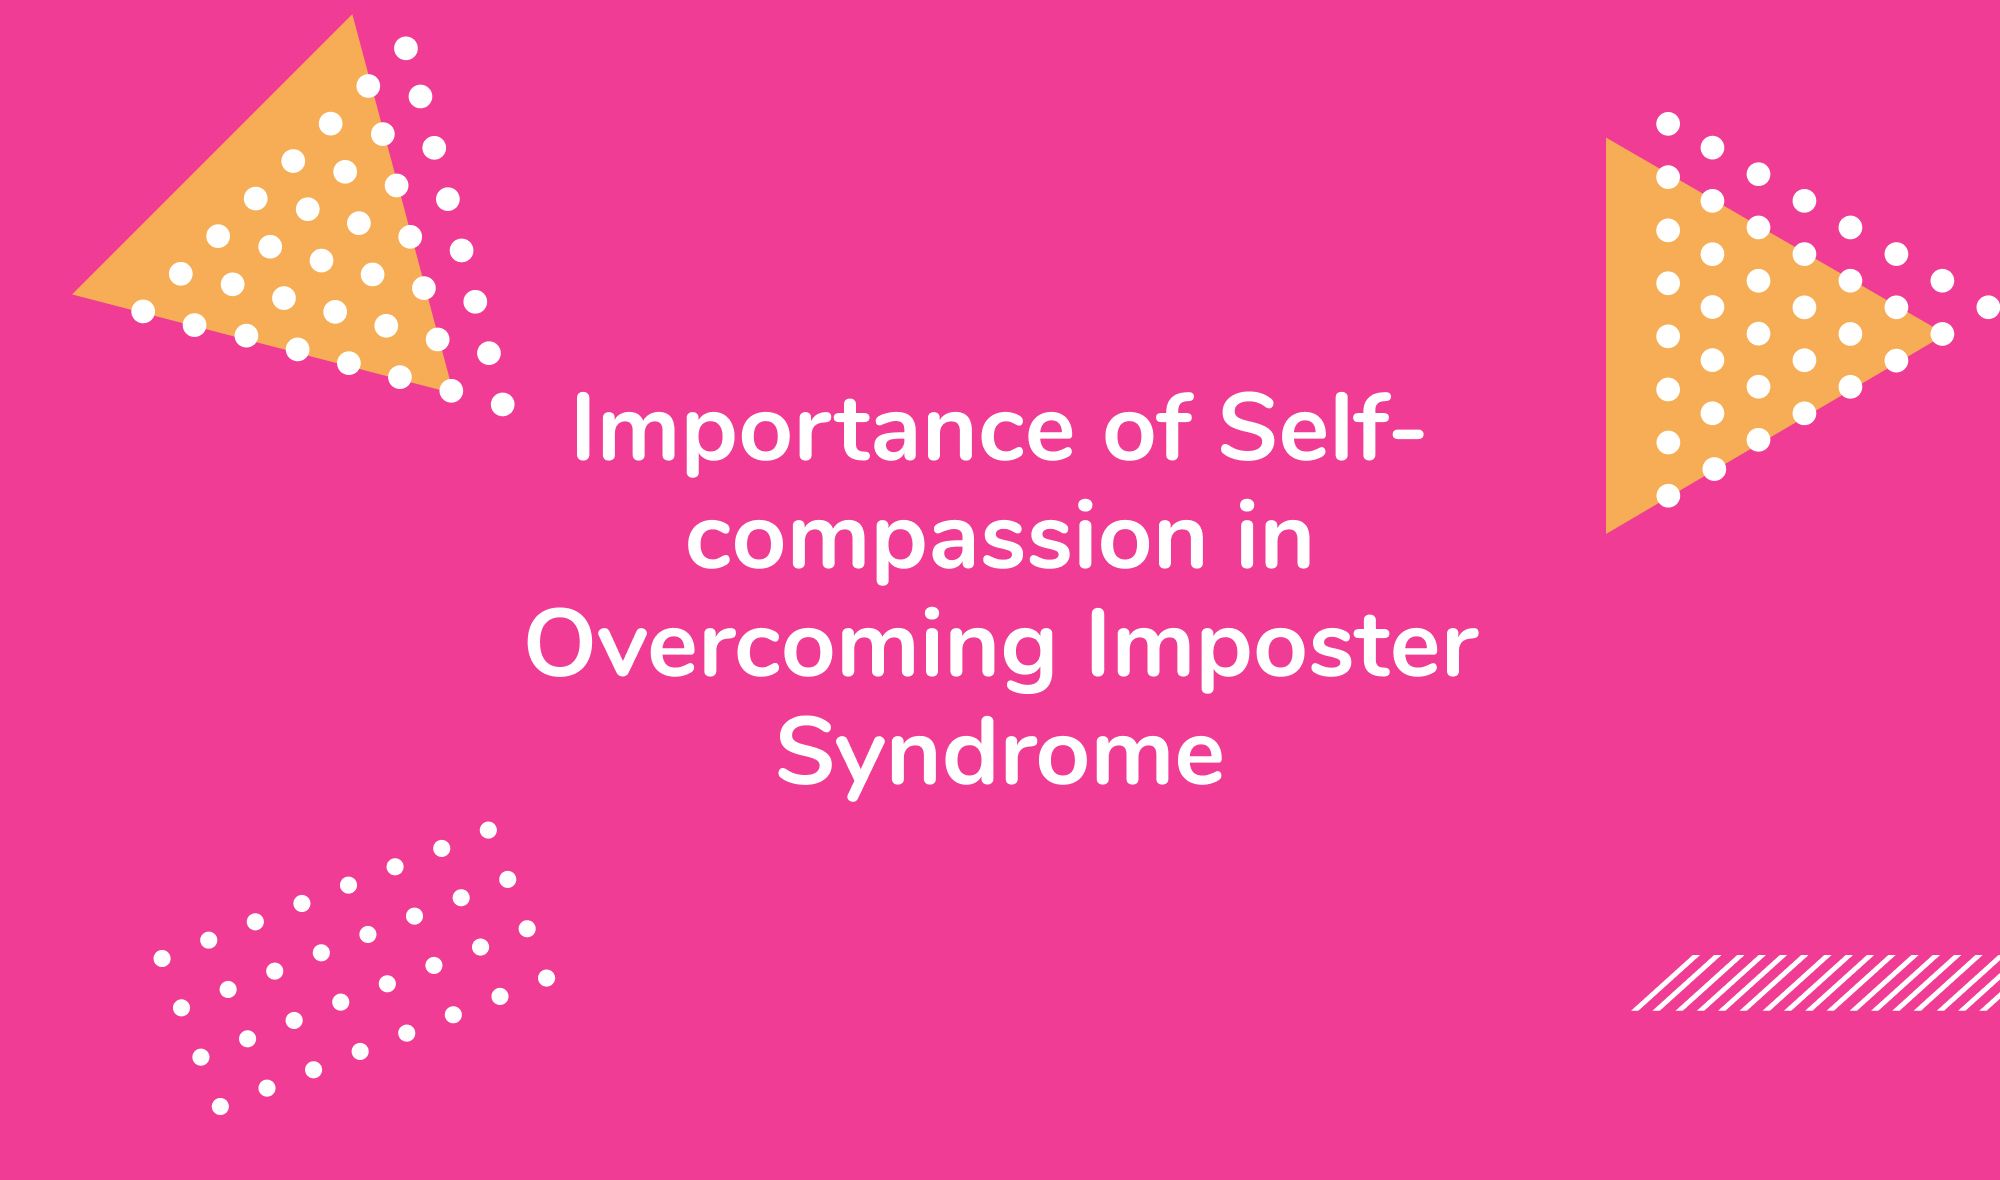 Importance of Self-compassion in Overcoming Imposter Syndrome